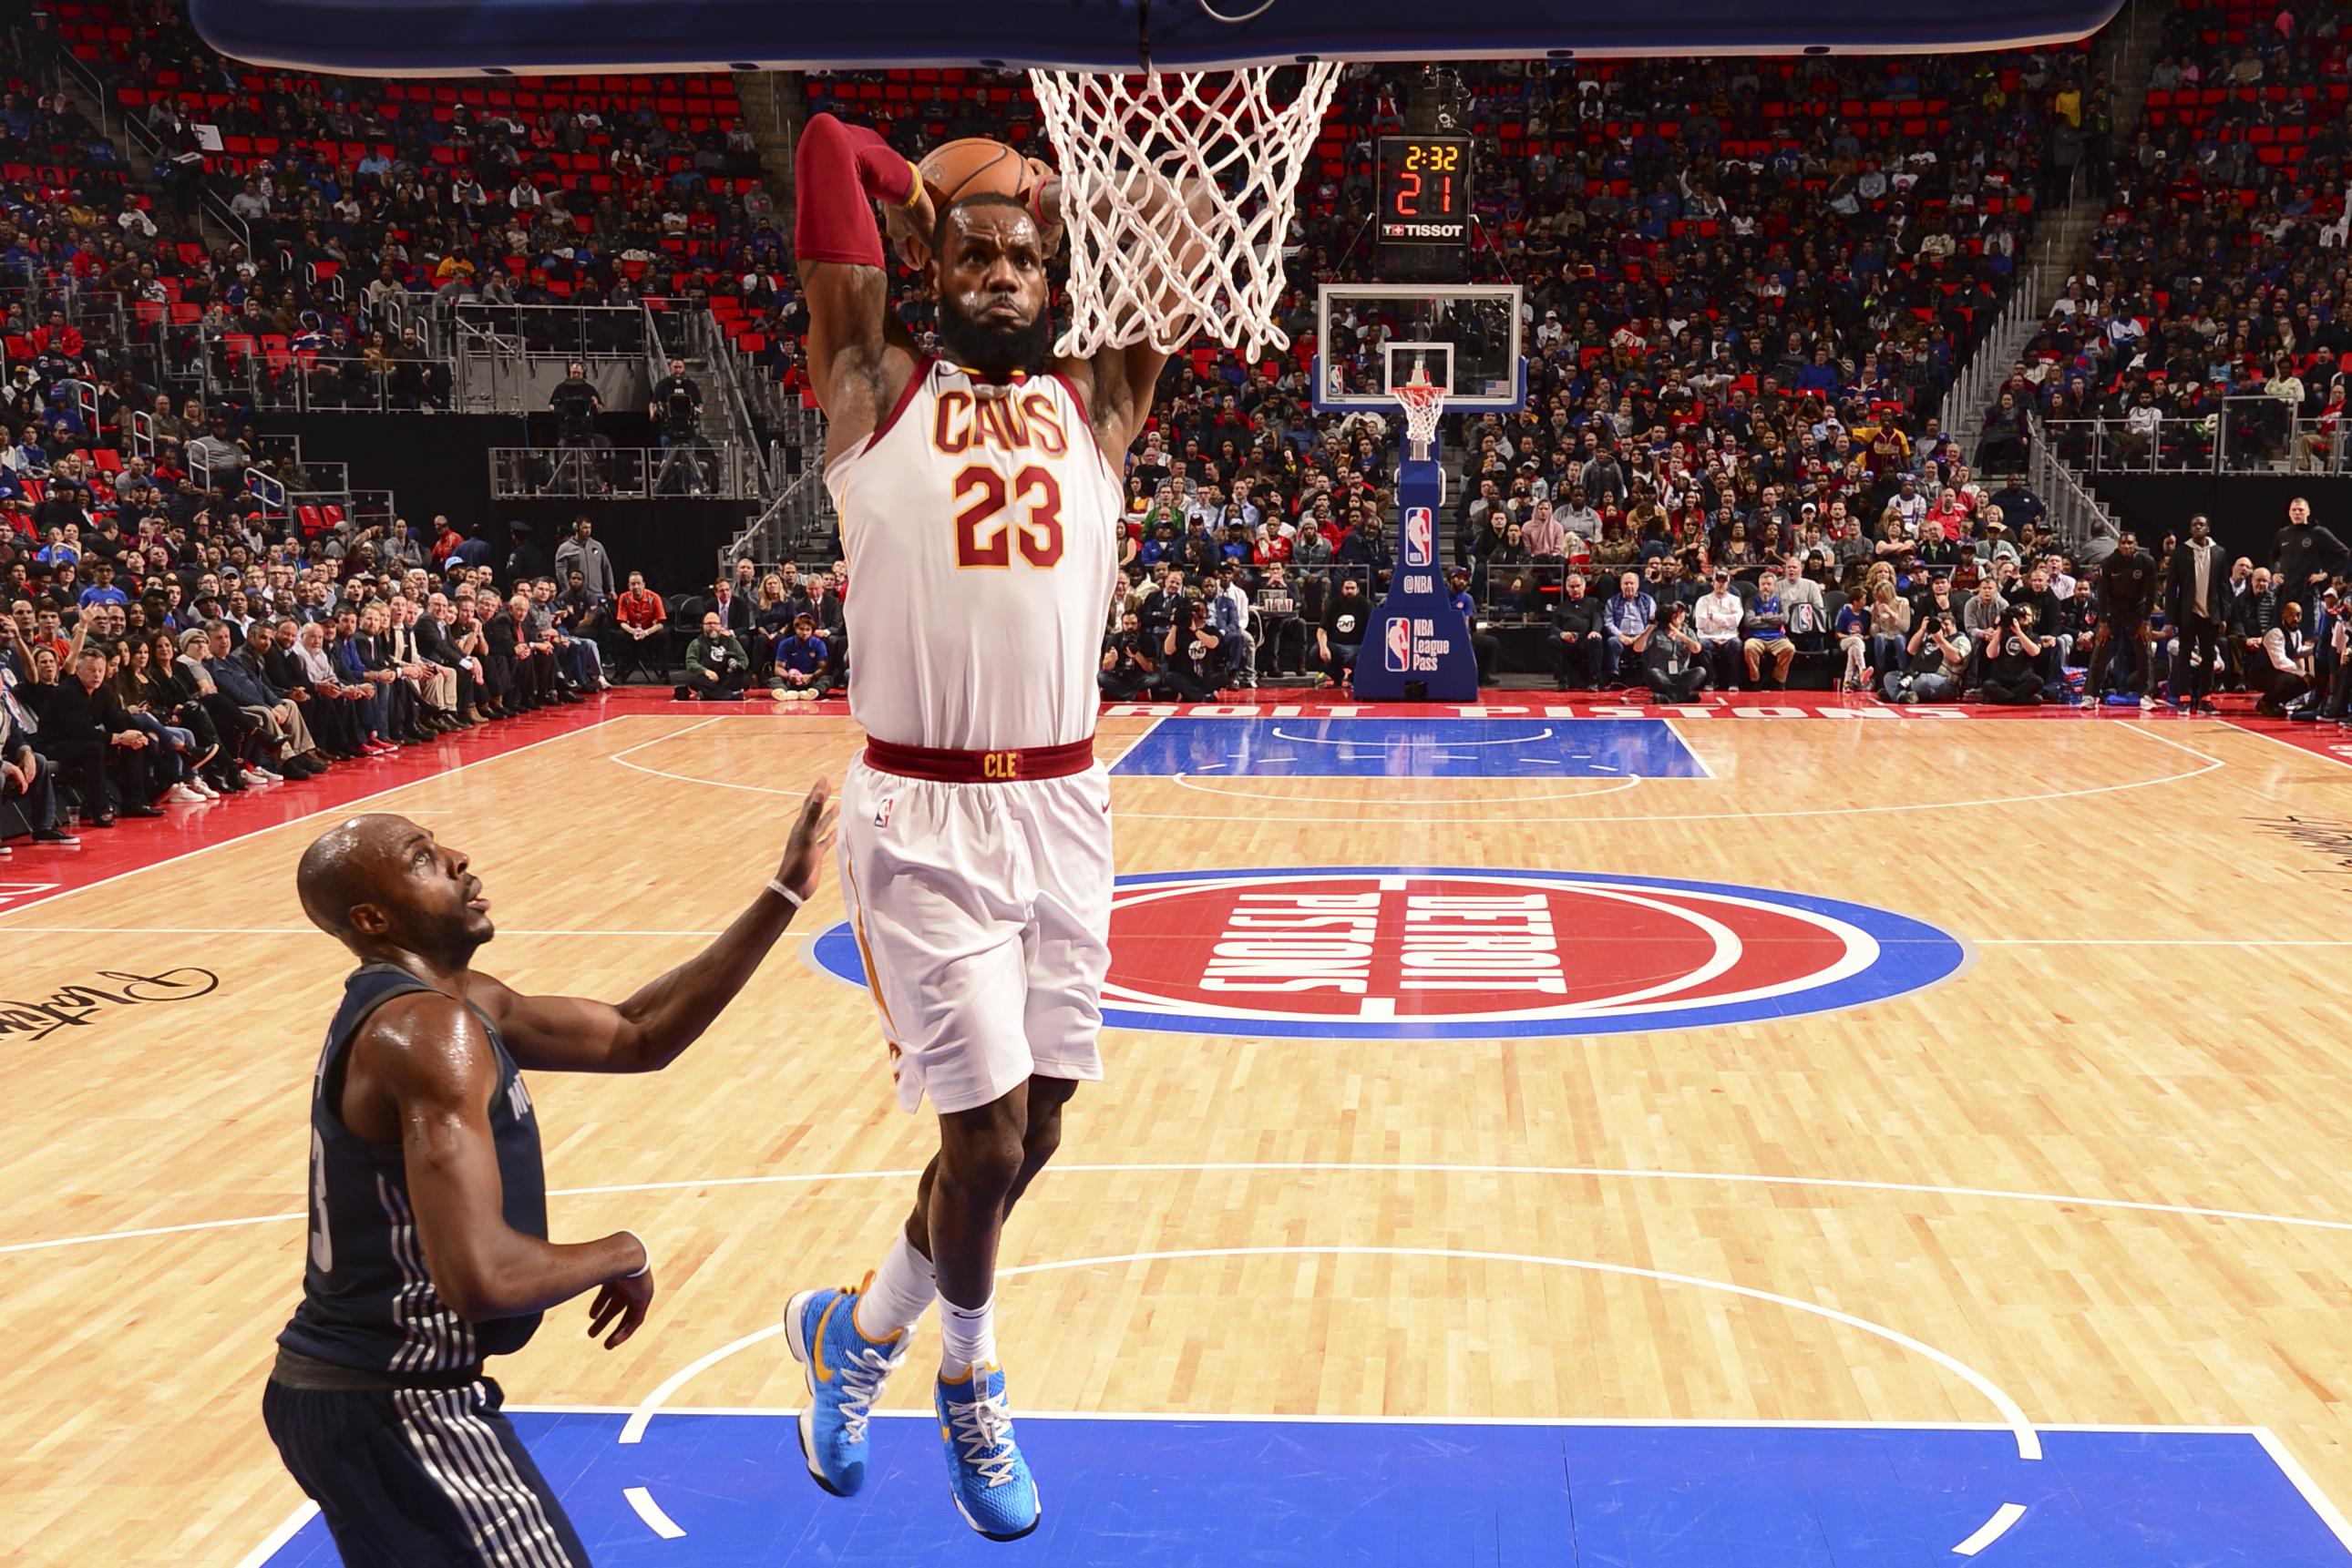 LeBron James impressed by dunk contest